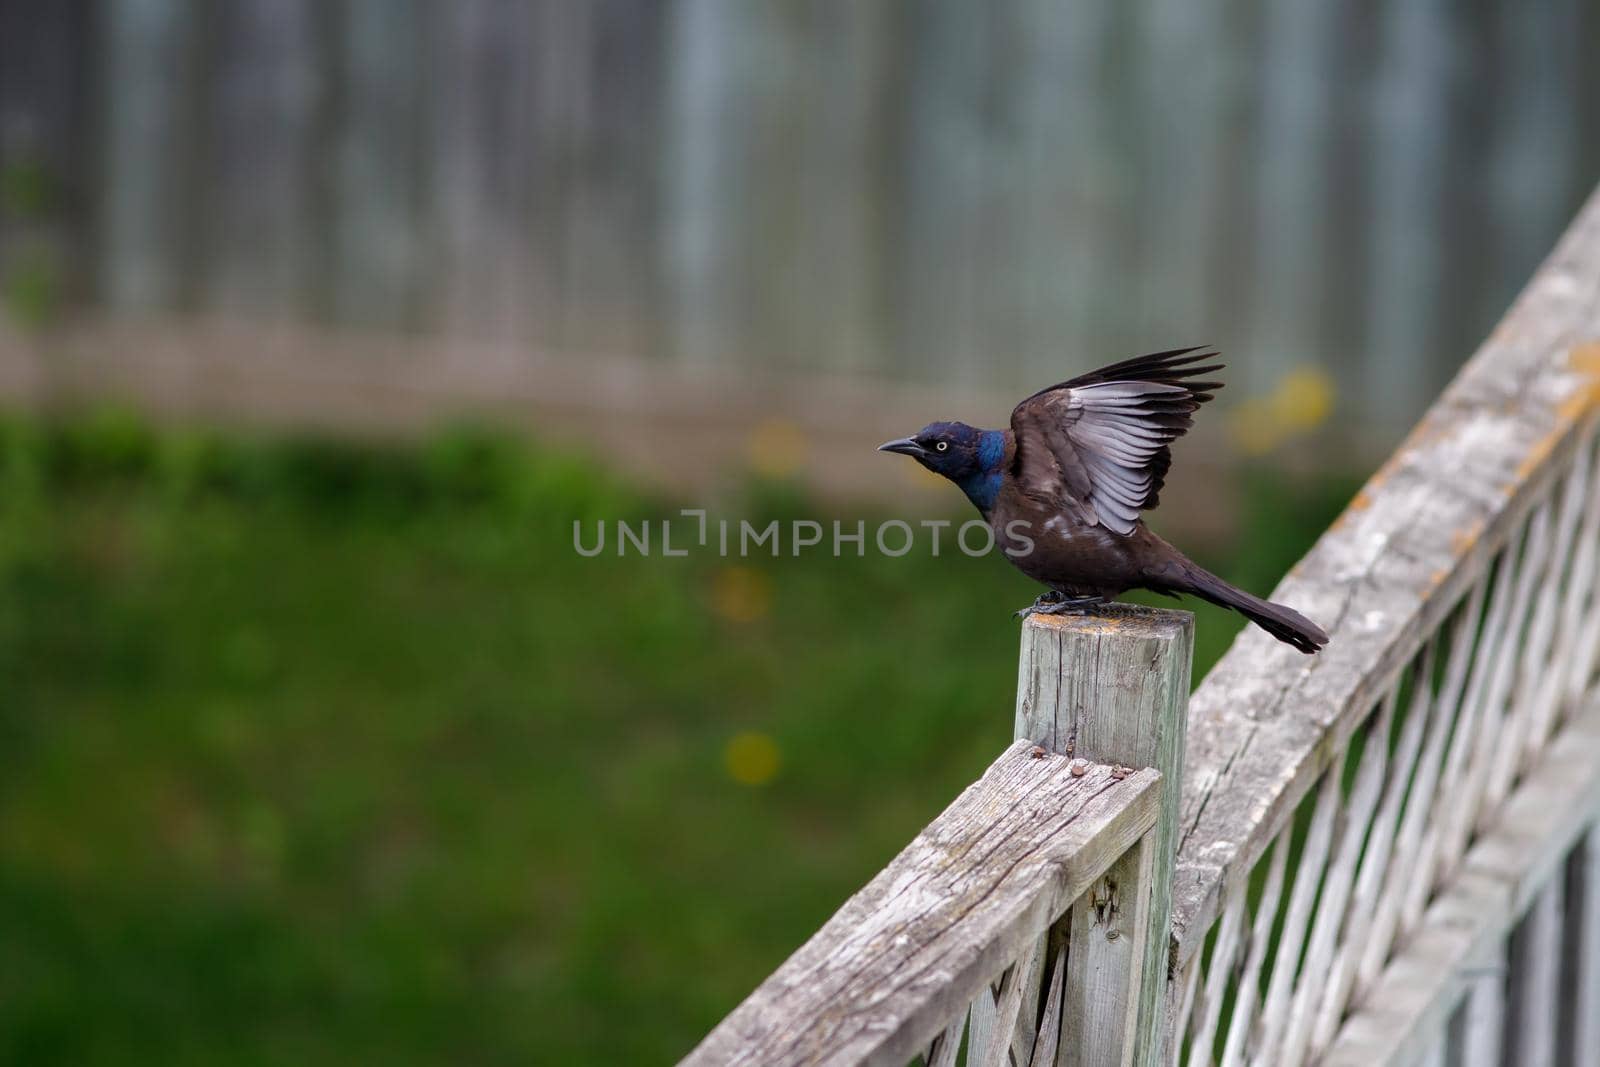 Grackle on a fence with raised wings by colintemple